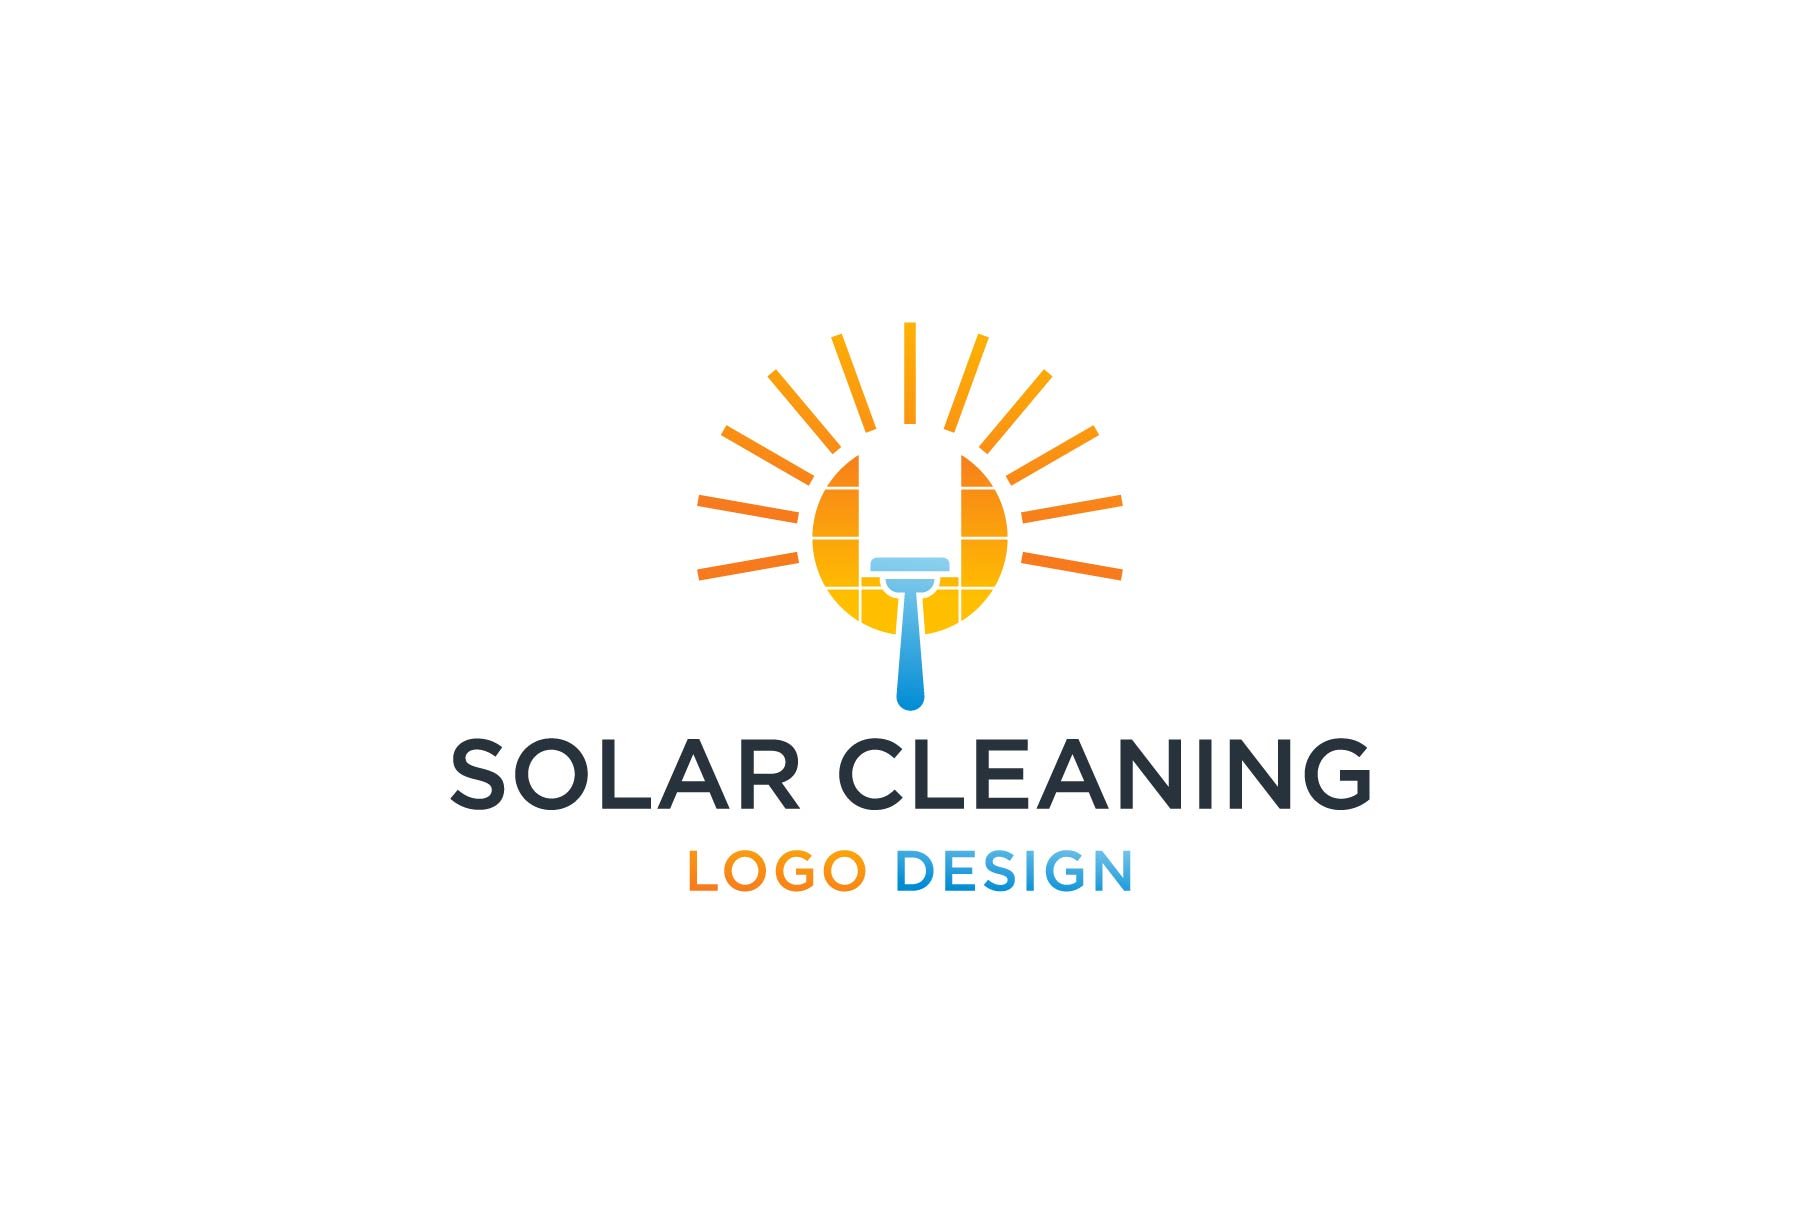 Solar Cleaning Logo Design cover image.